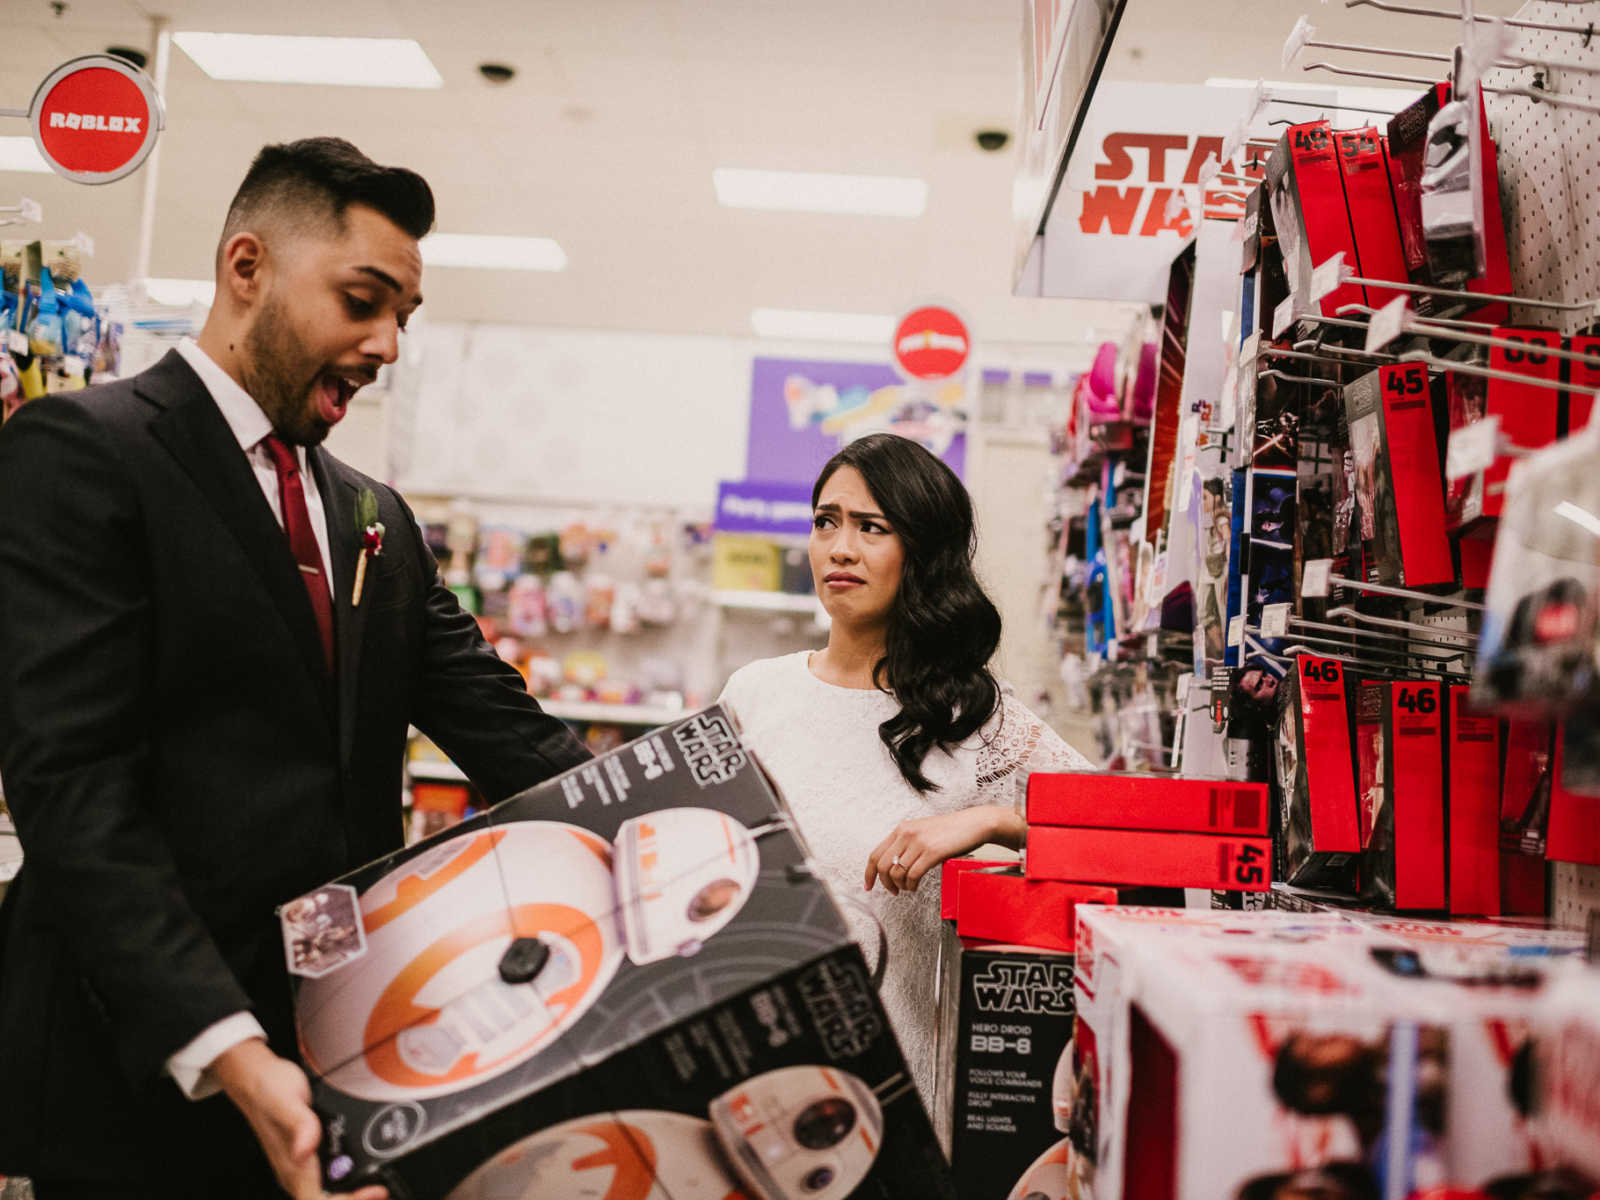 Bride looks at groom with puzzled look as he holds up Star Wars toy in excitement in Target aisle